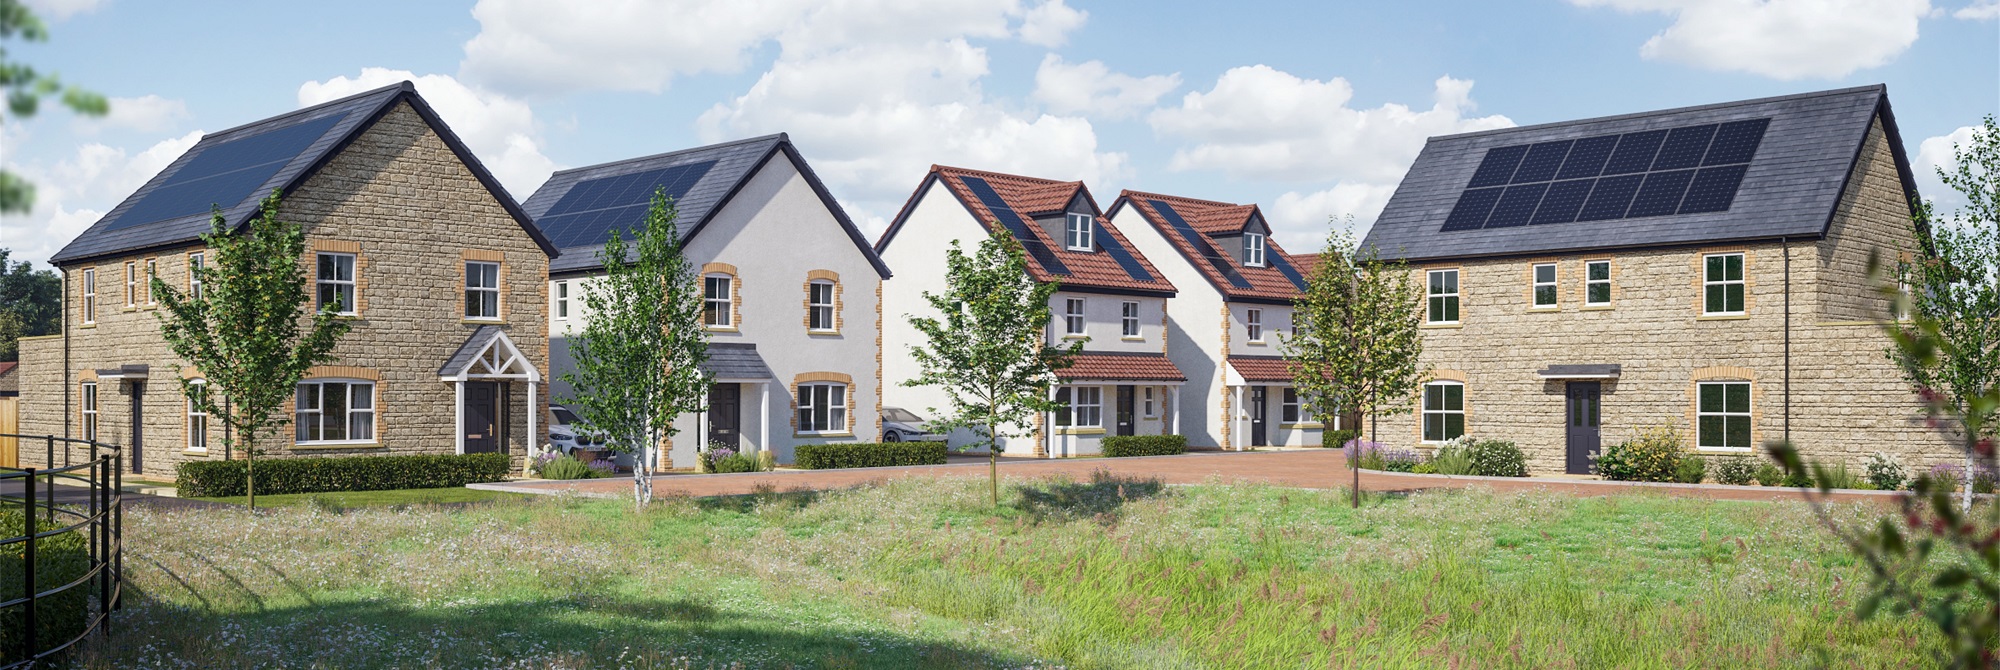 New homes in Engine Common near Yate